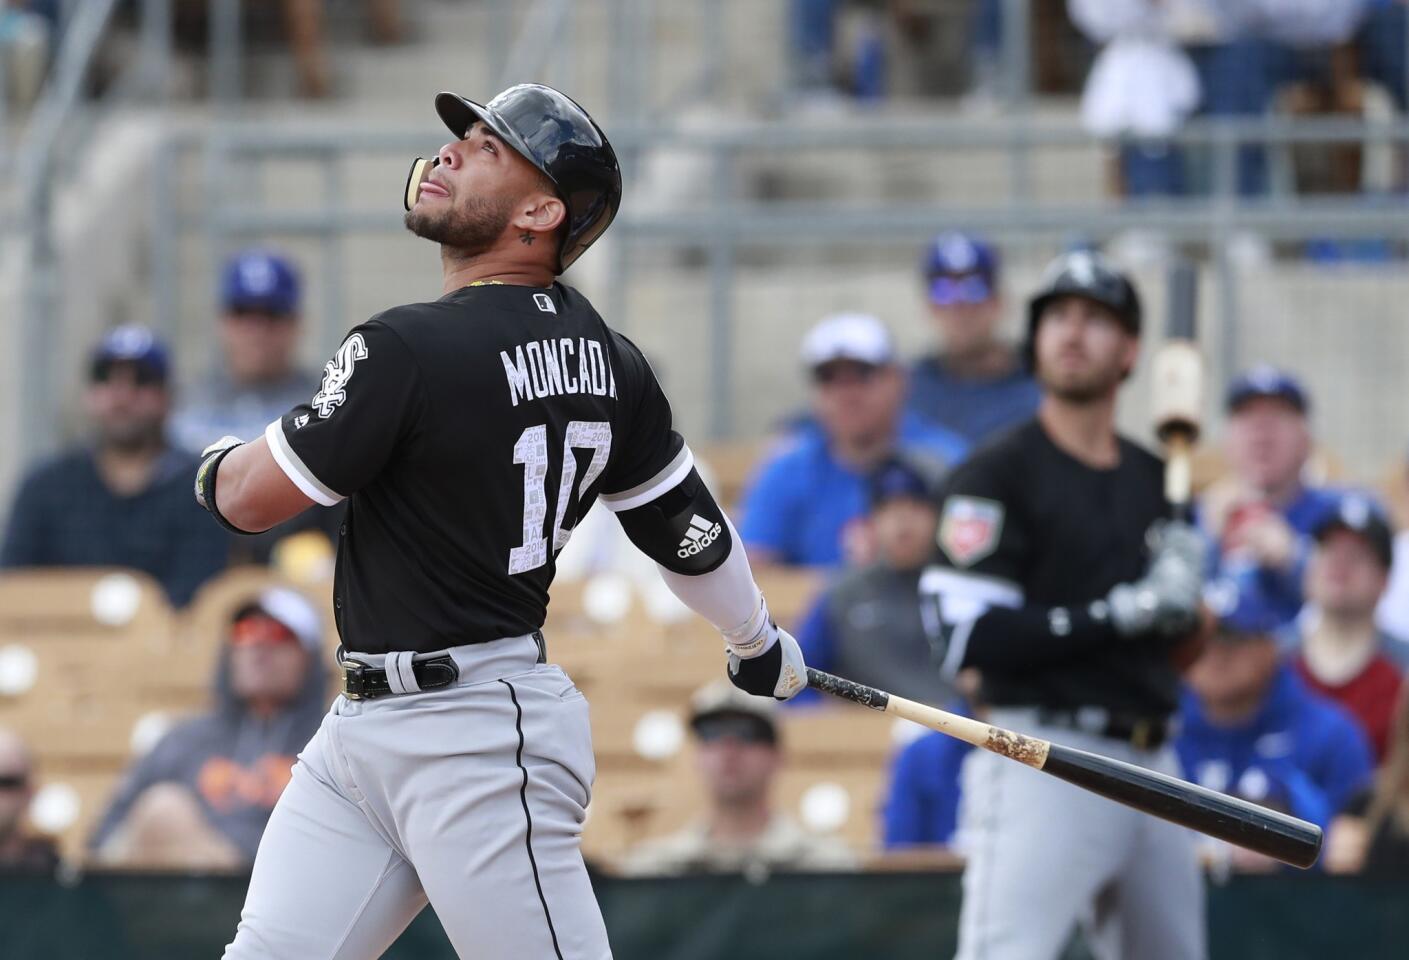 Yoan Moncada bats during a spring game against the Los Angeles Dodgers, in Glendale, Ariz., on Feb. 23, 2018.